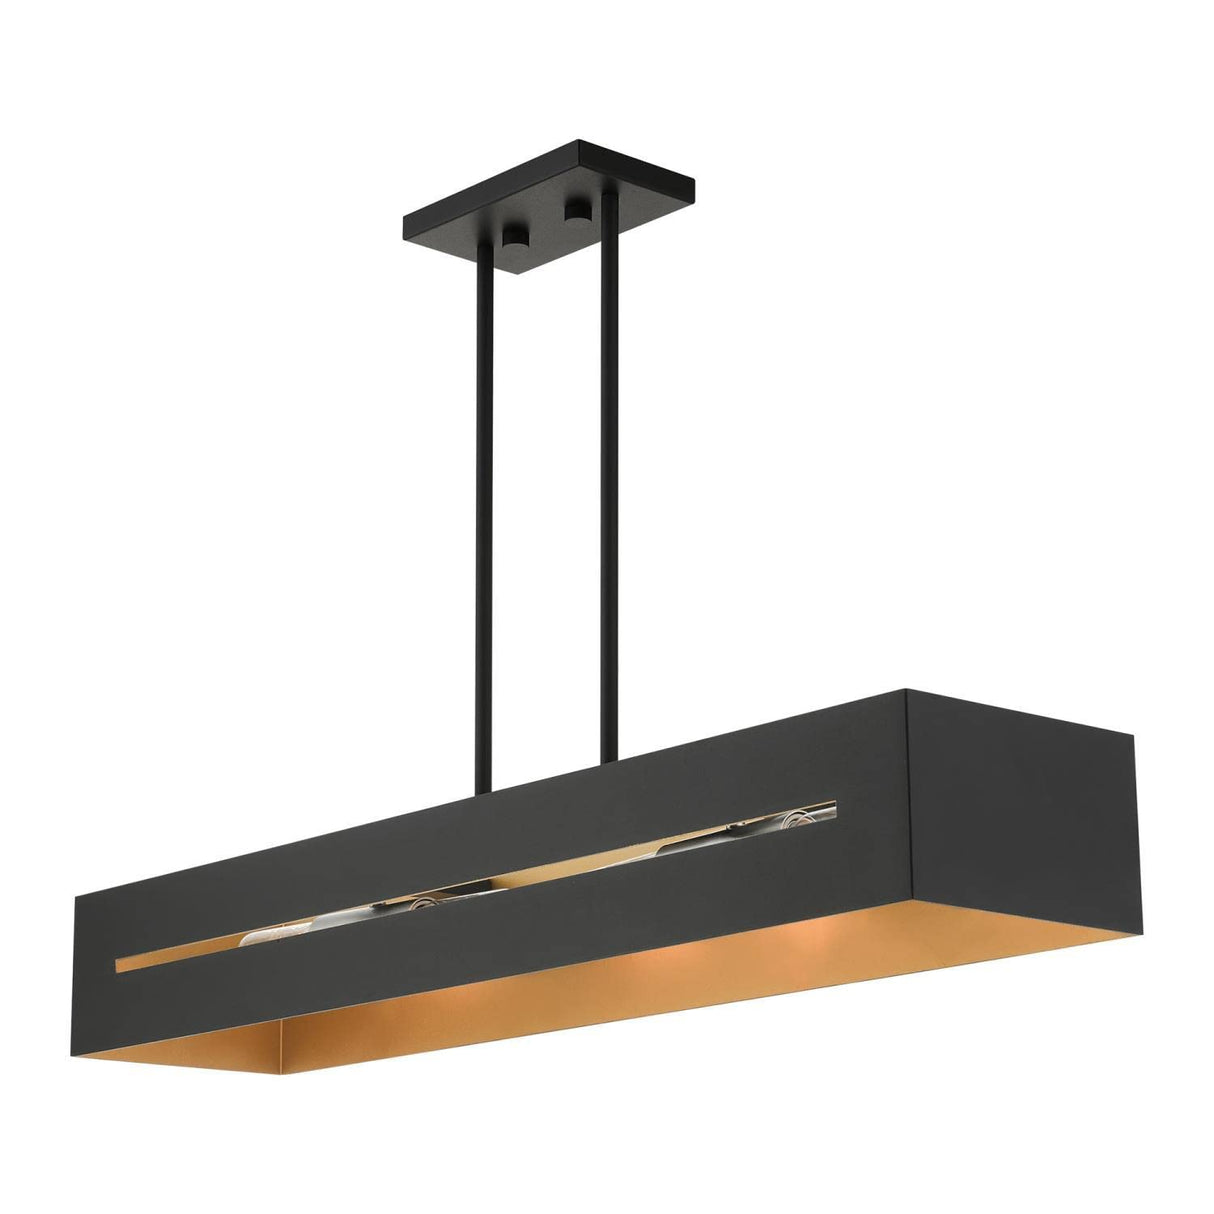 Livex Lighting 4 Lt Textured Black with Brushed Nickel Accents Linear Chandelier (45957-14), Medium